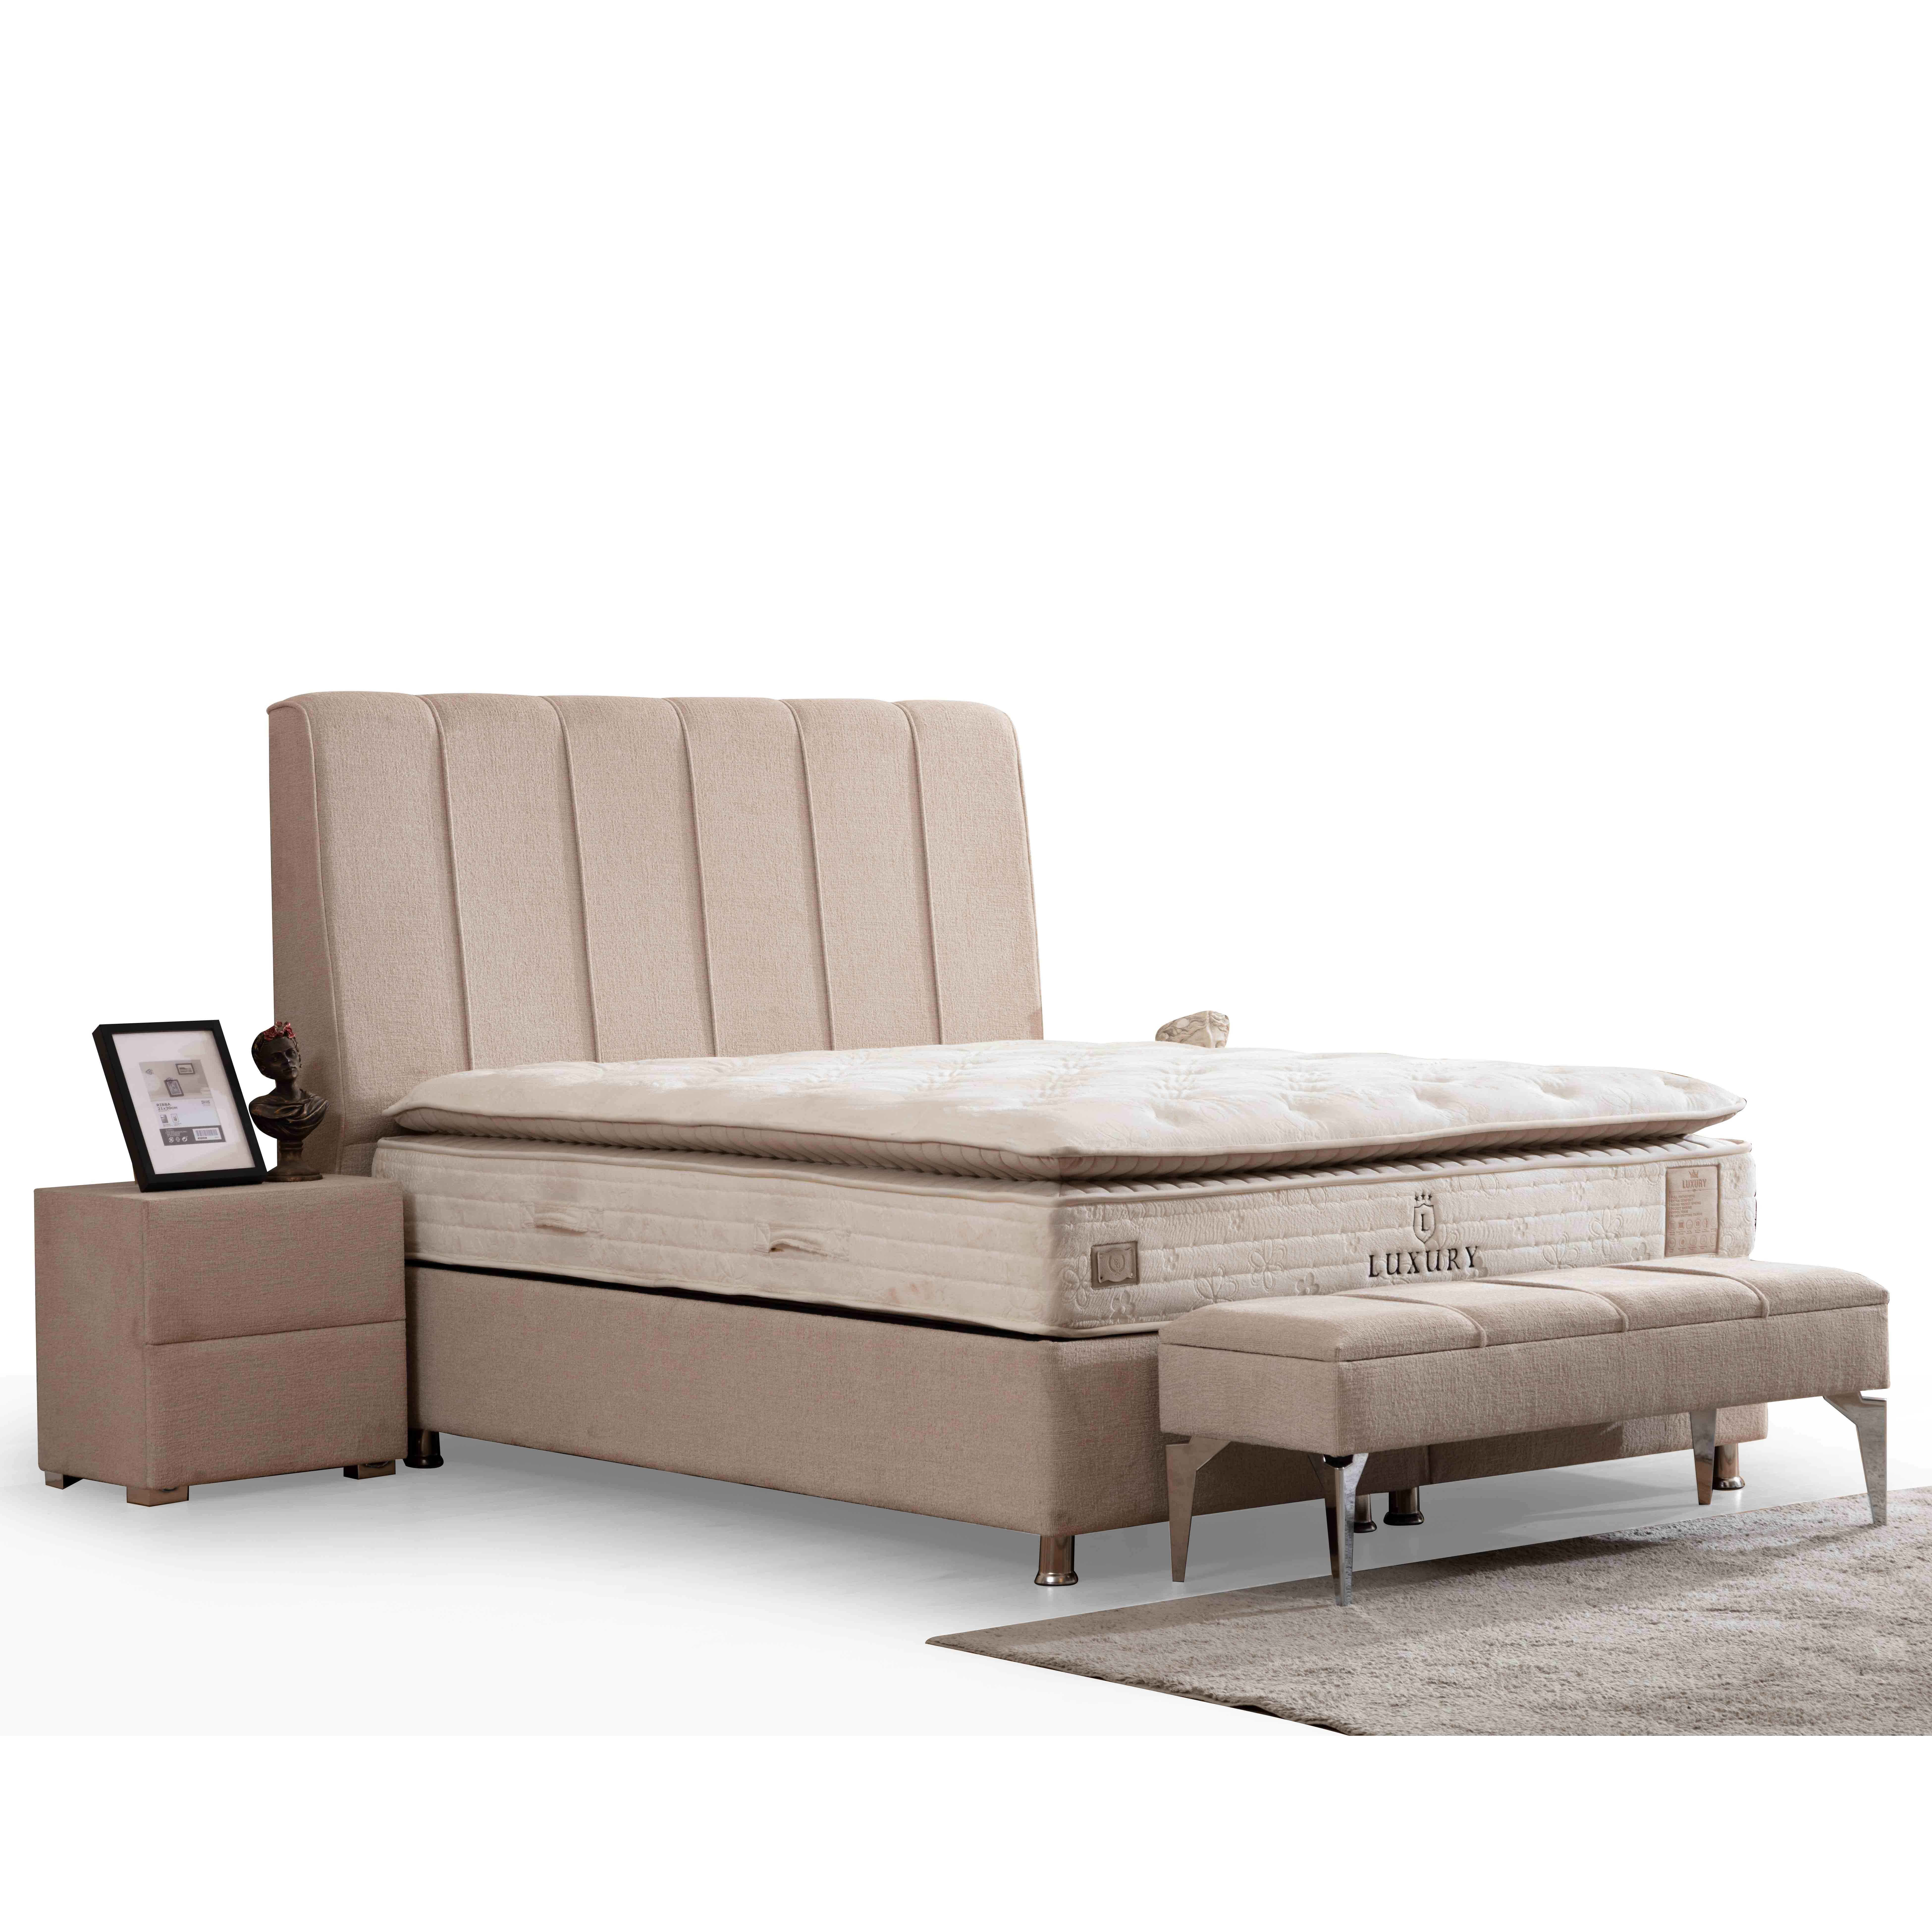 Prime Bed With Storage 180*200